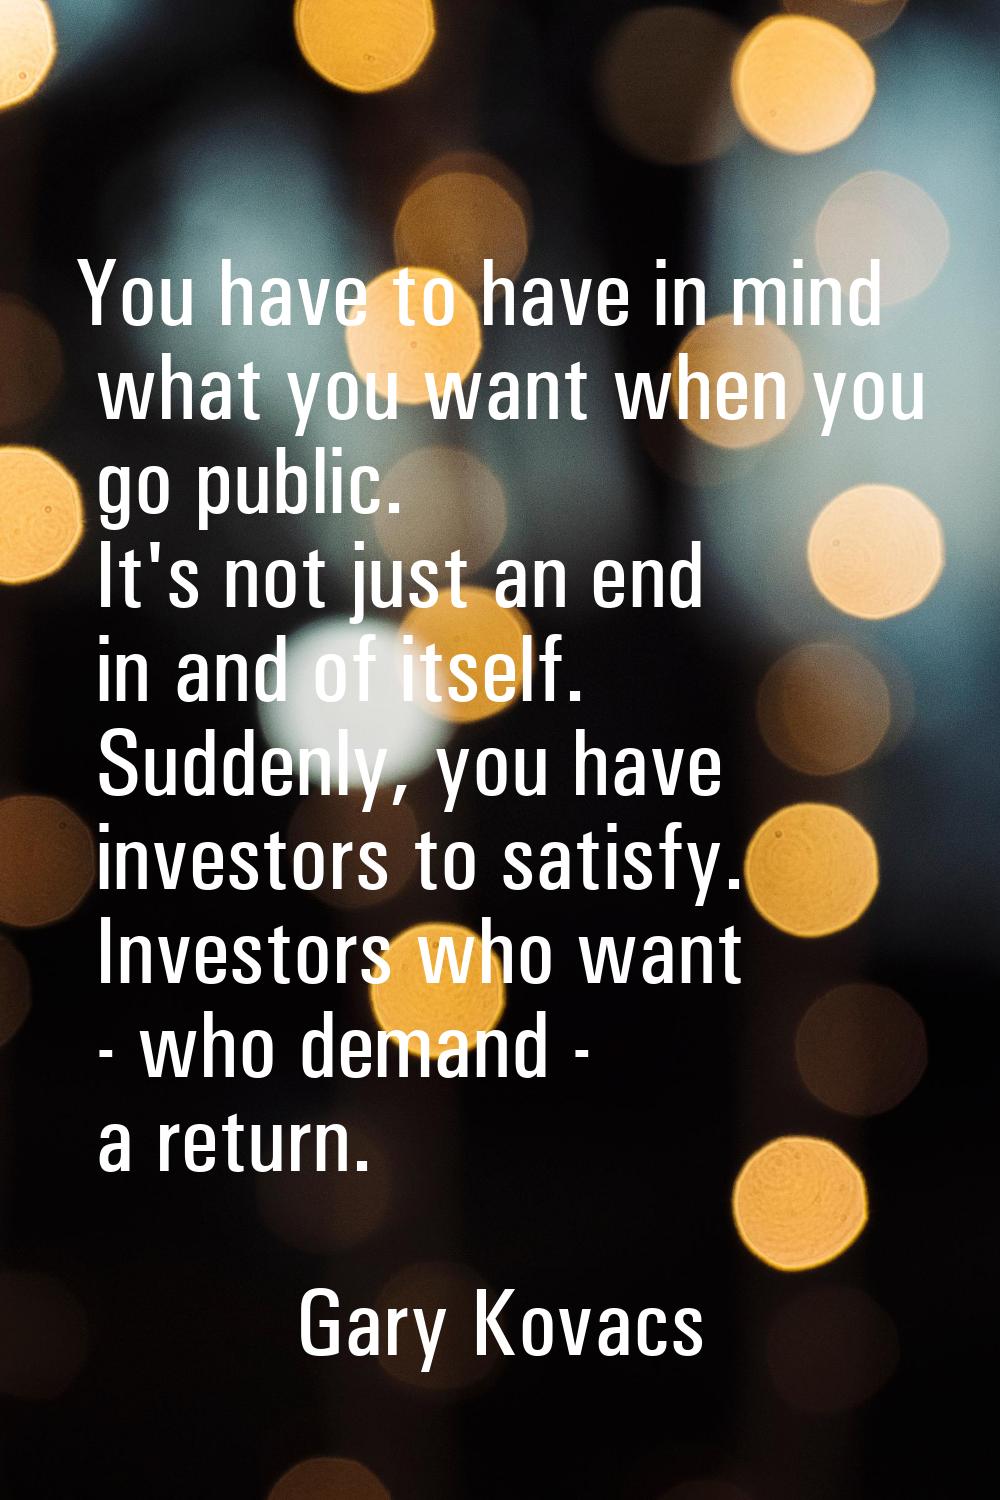 You have to have in mind what you want when you go public. It's not just an end in and of itself. S